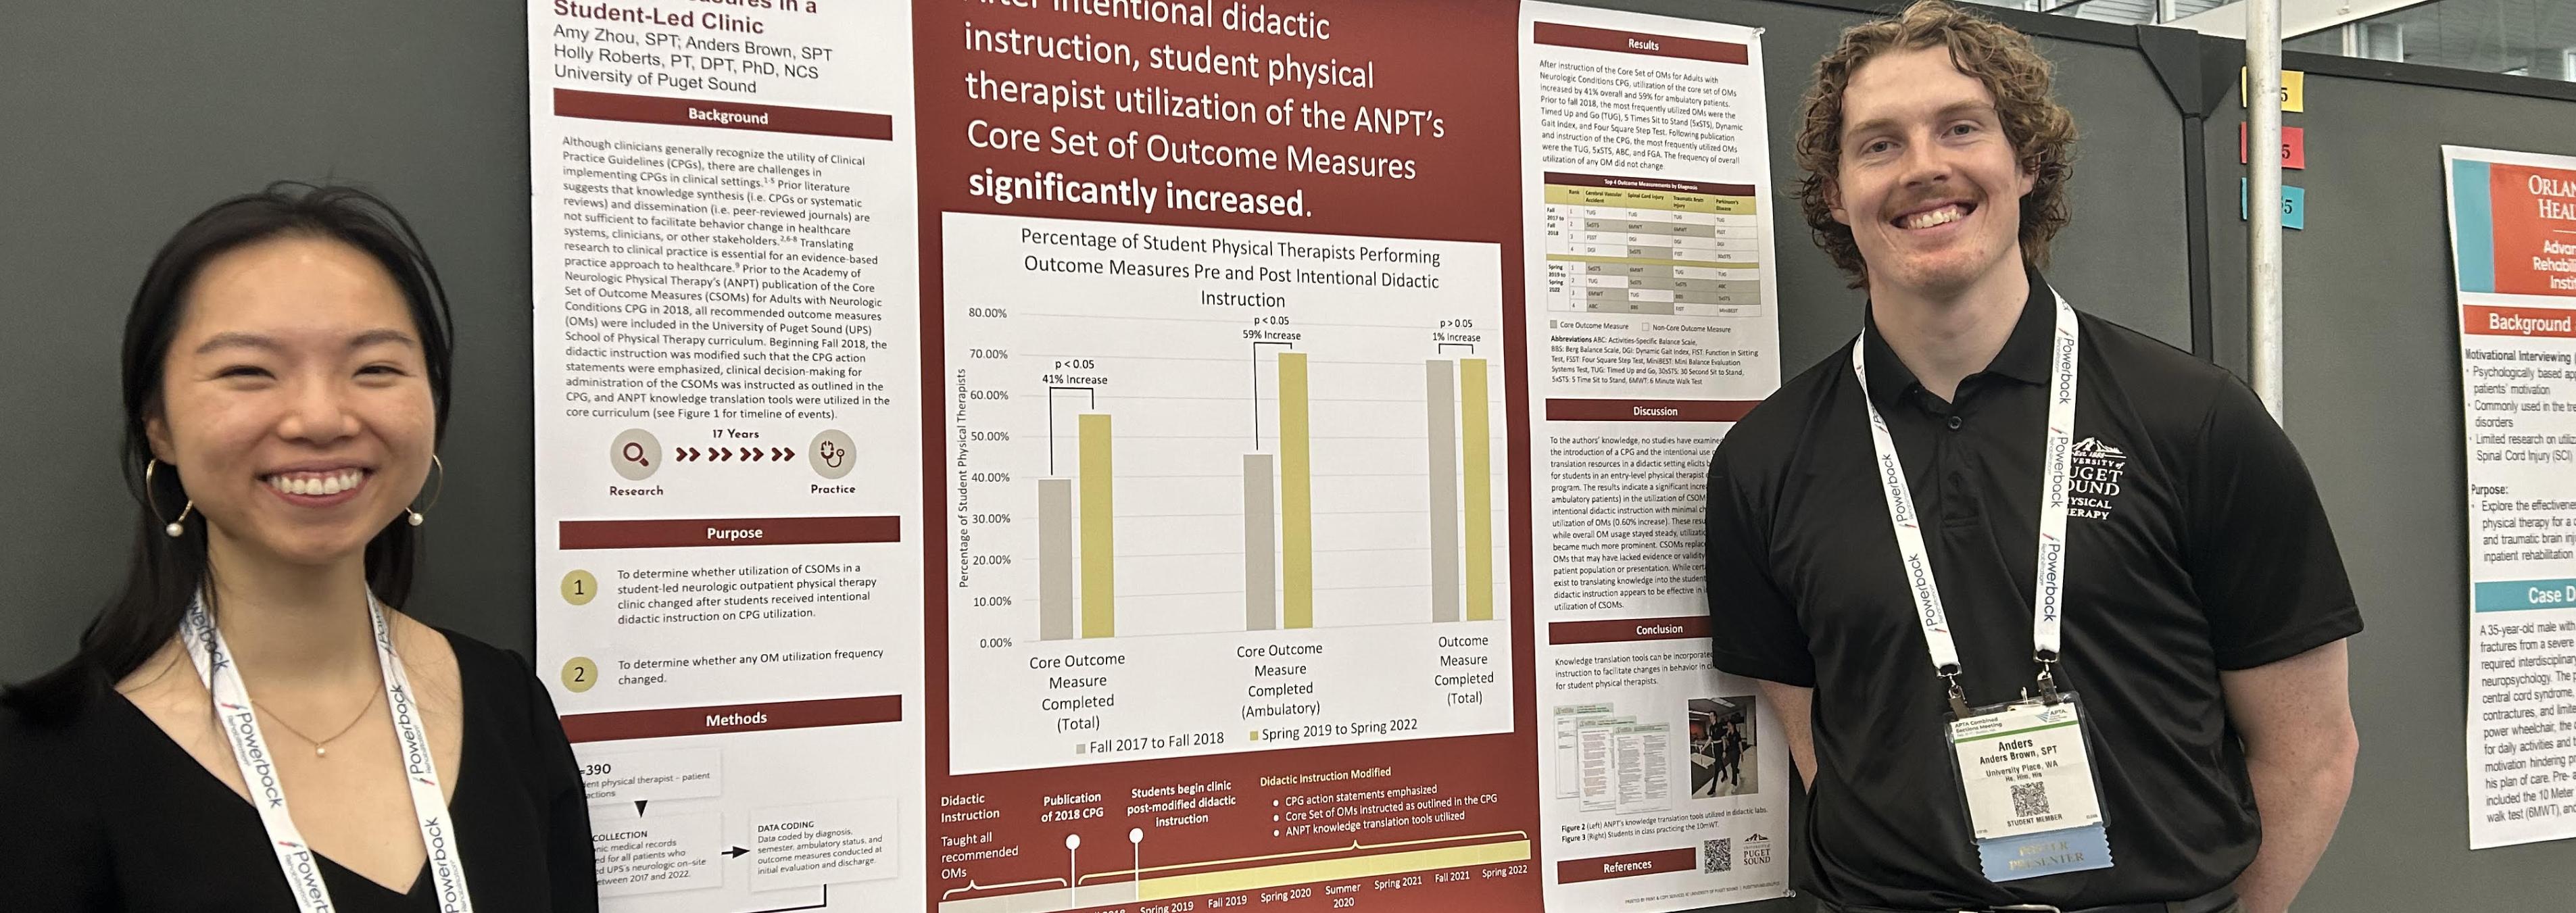 Amy Zhou DPT’24 and Anders Brown DPT’24 present research at the American Physical Therapy Association Combined Sections Meeting in Boston.